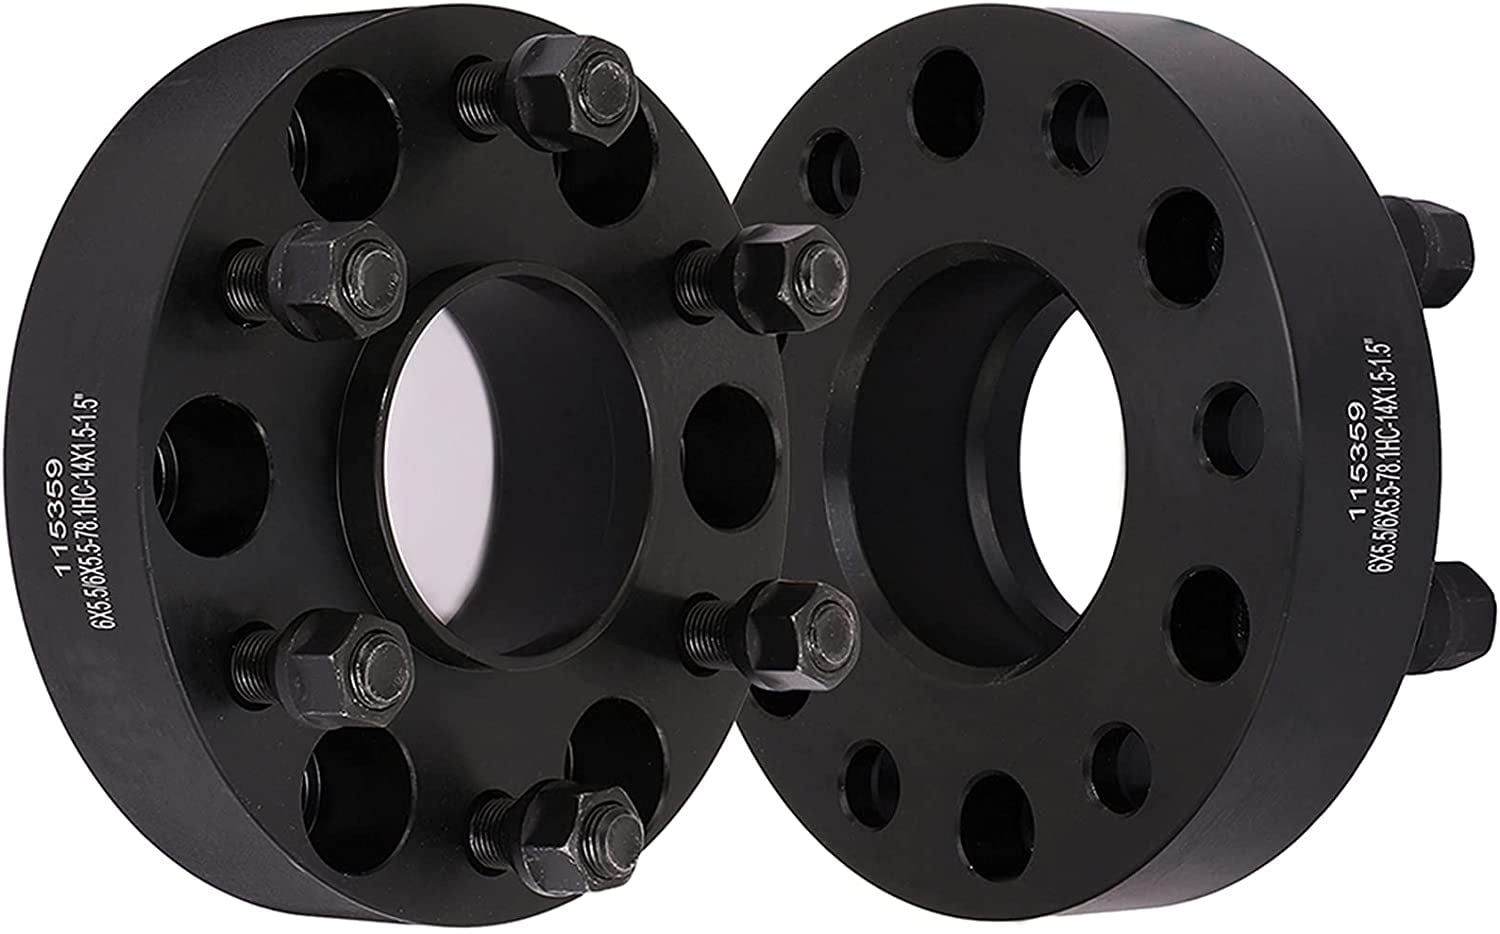 ¦ 14X1.578.1 ¦ 2.5 InchUSED 2X Hubcentric Wheel Spacers ¦ 6x5.5 6X139.7 